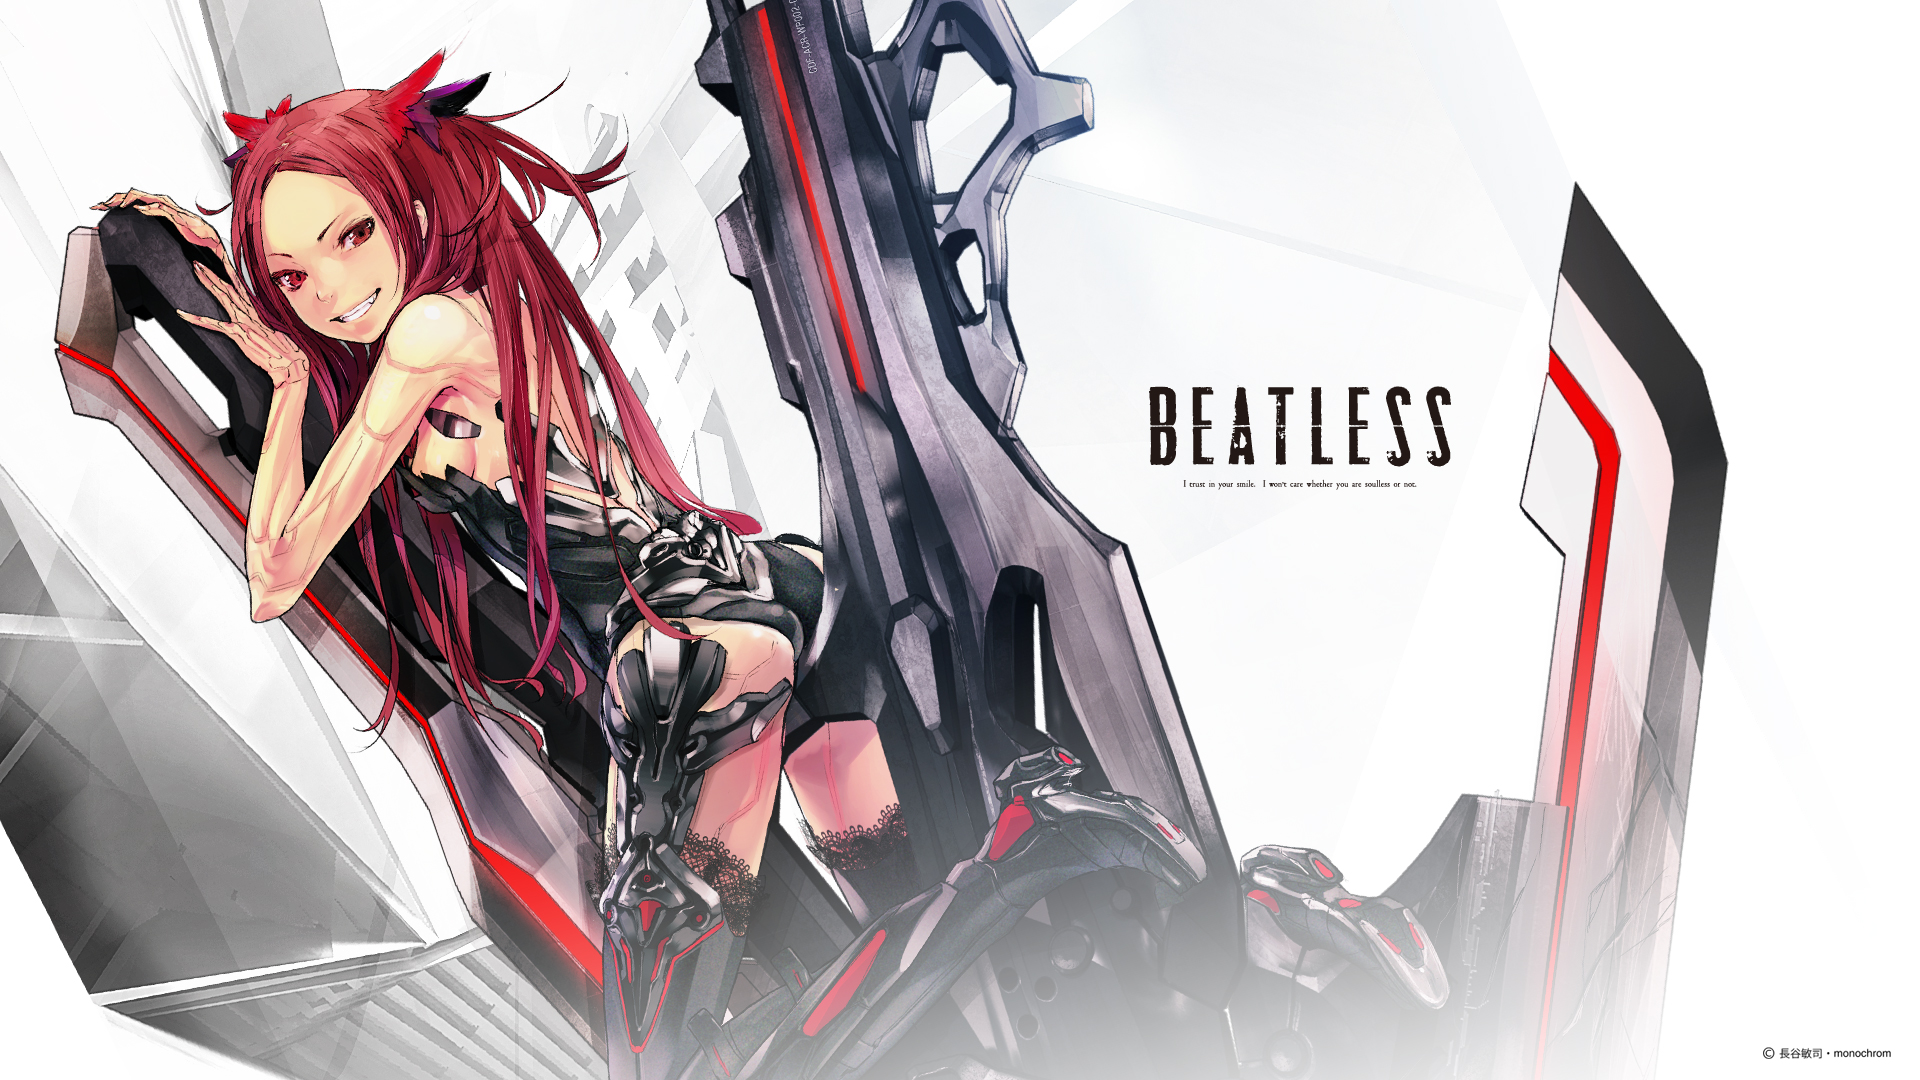 Wallpaper ID: 126779 / anime girls, Beatless, Lacia, frontal view, anime  free download